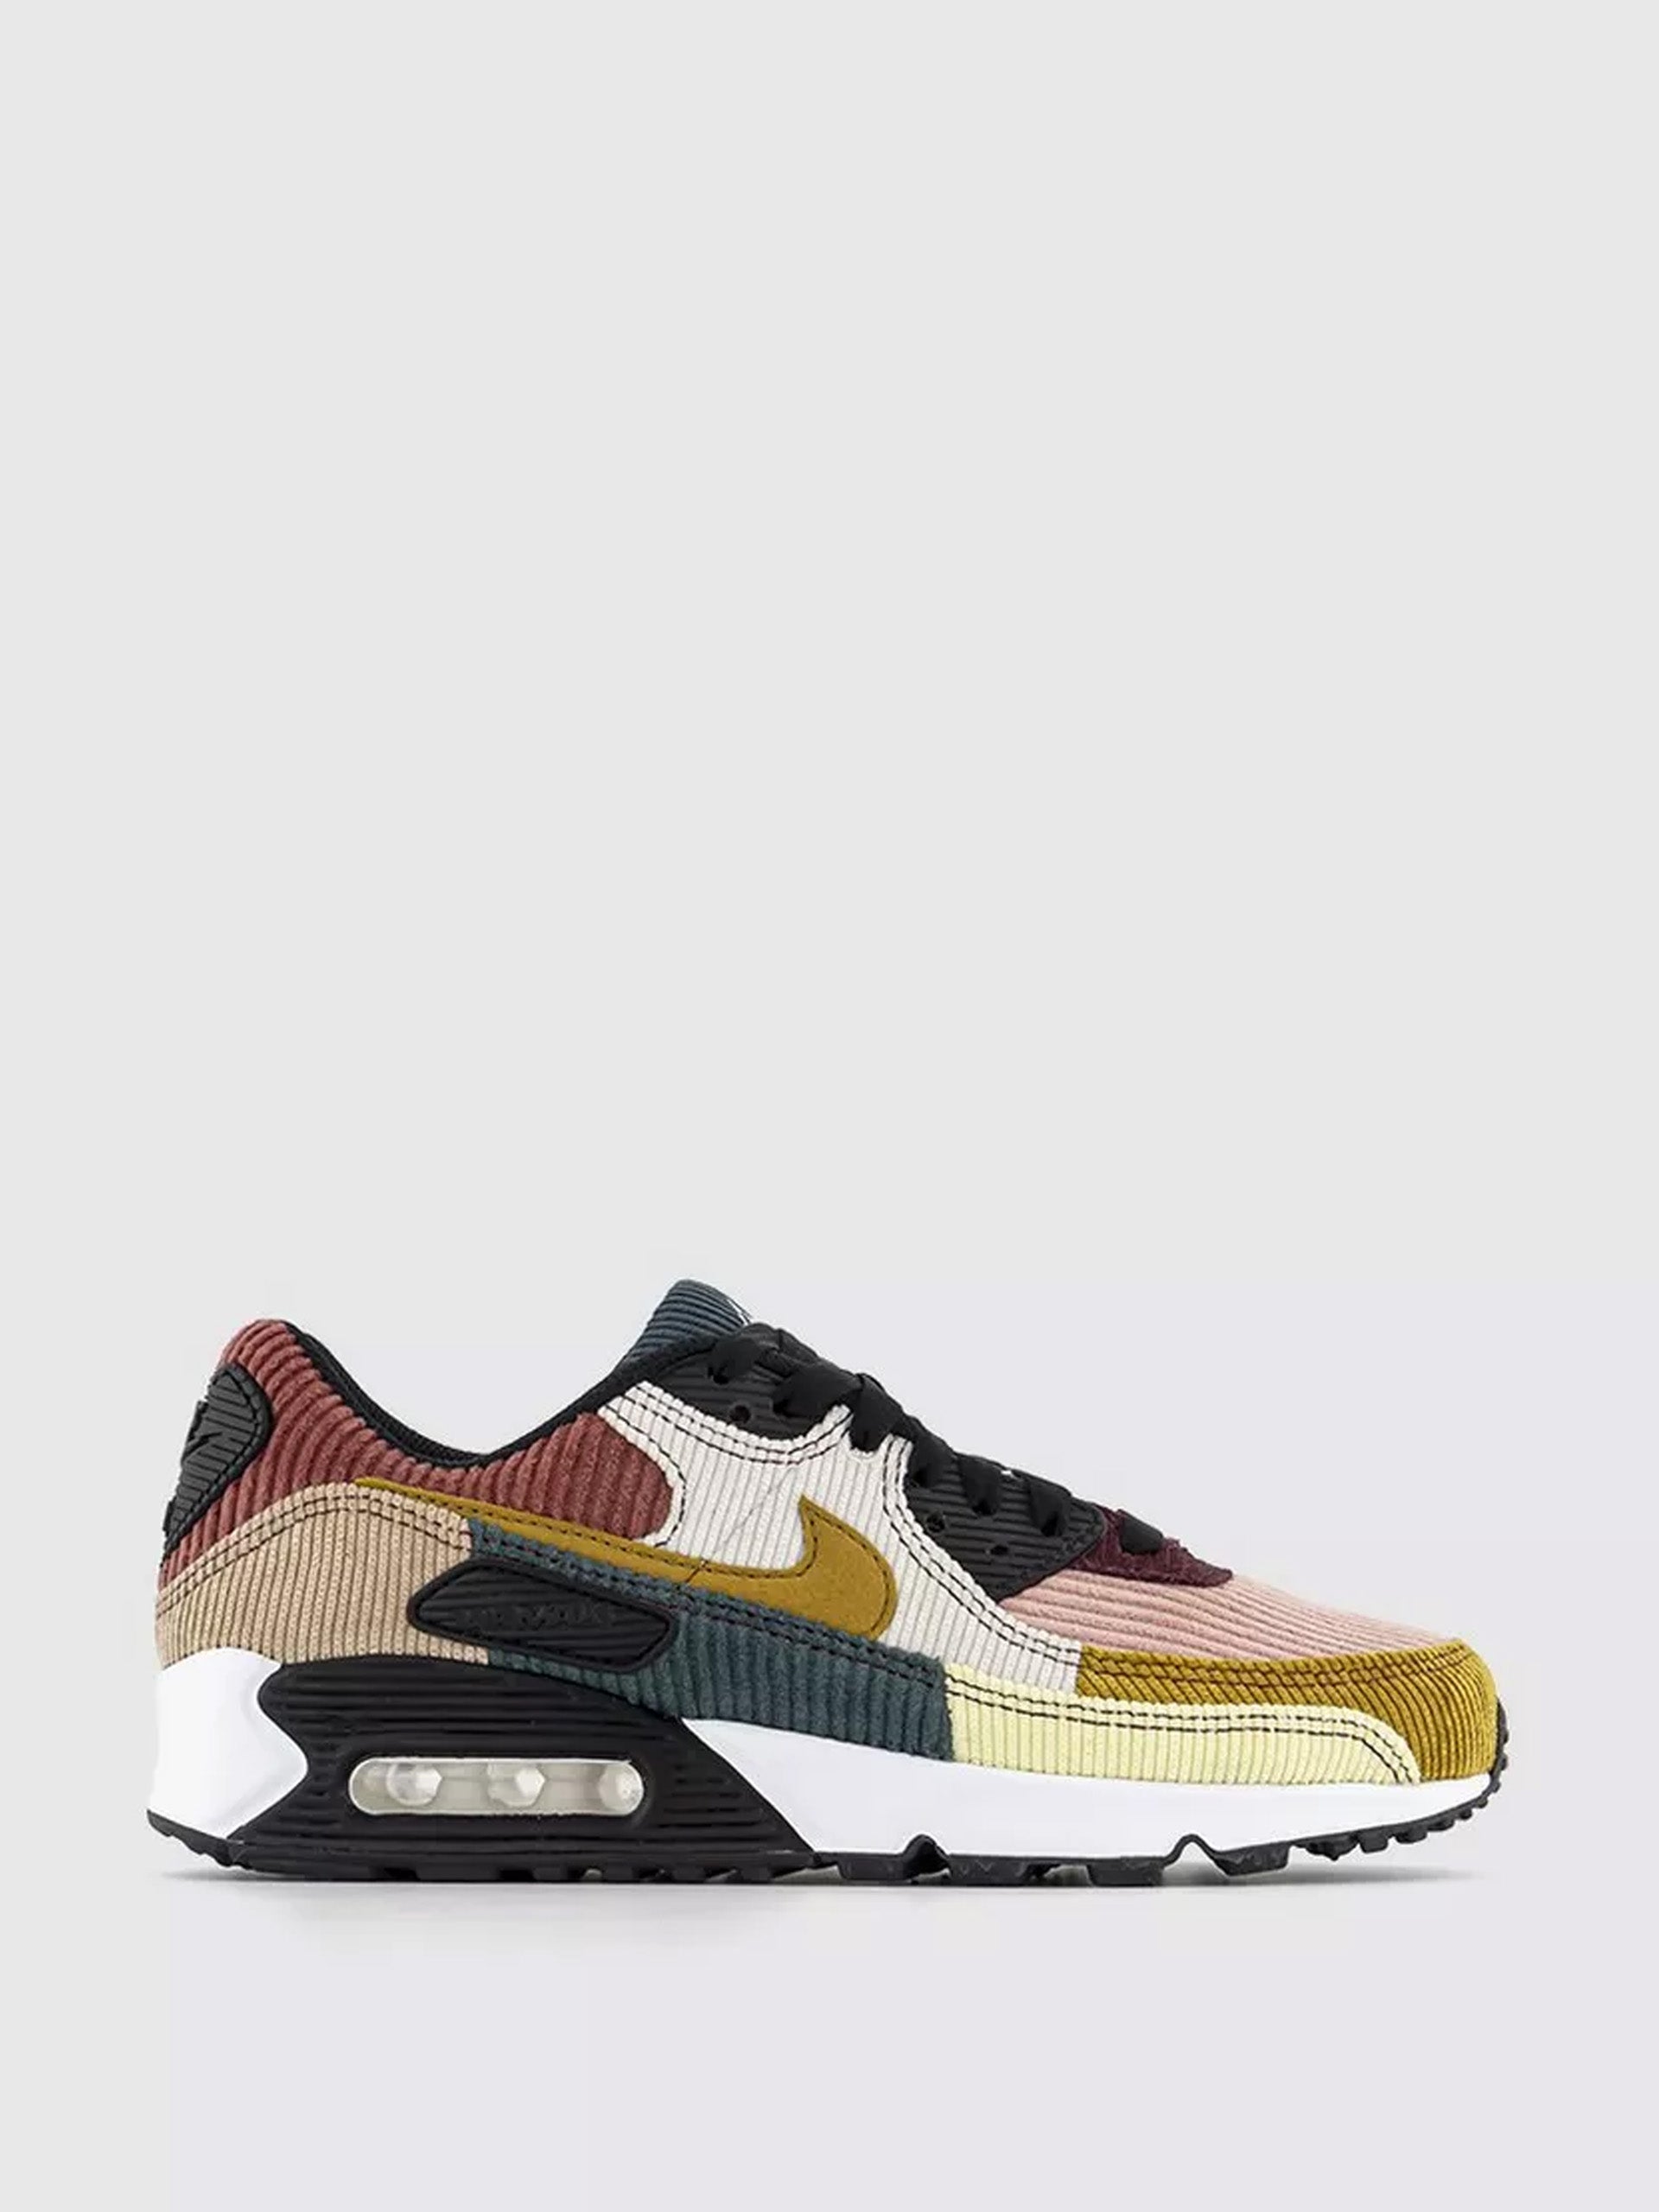 Air Max 90 trainers